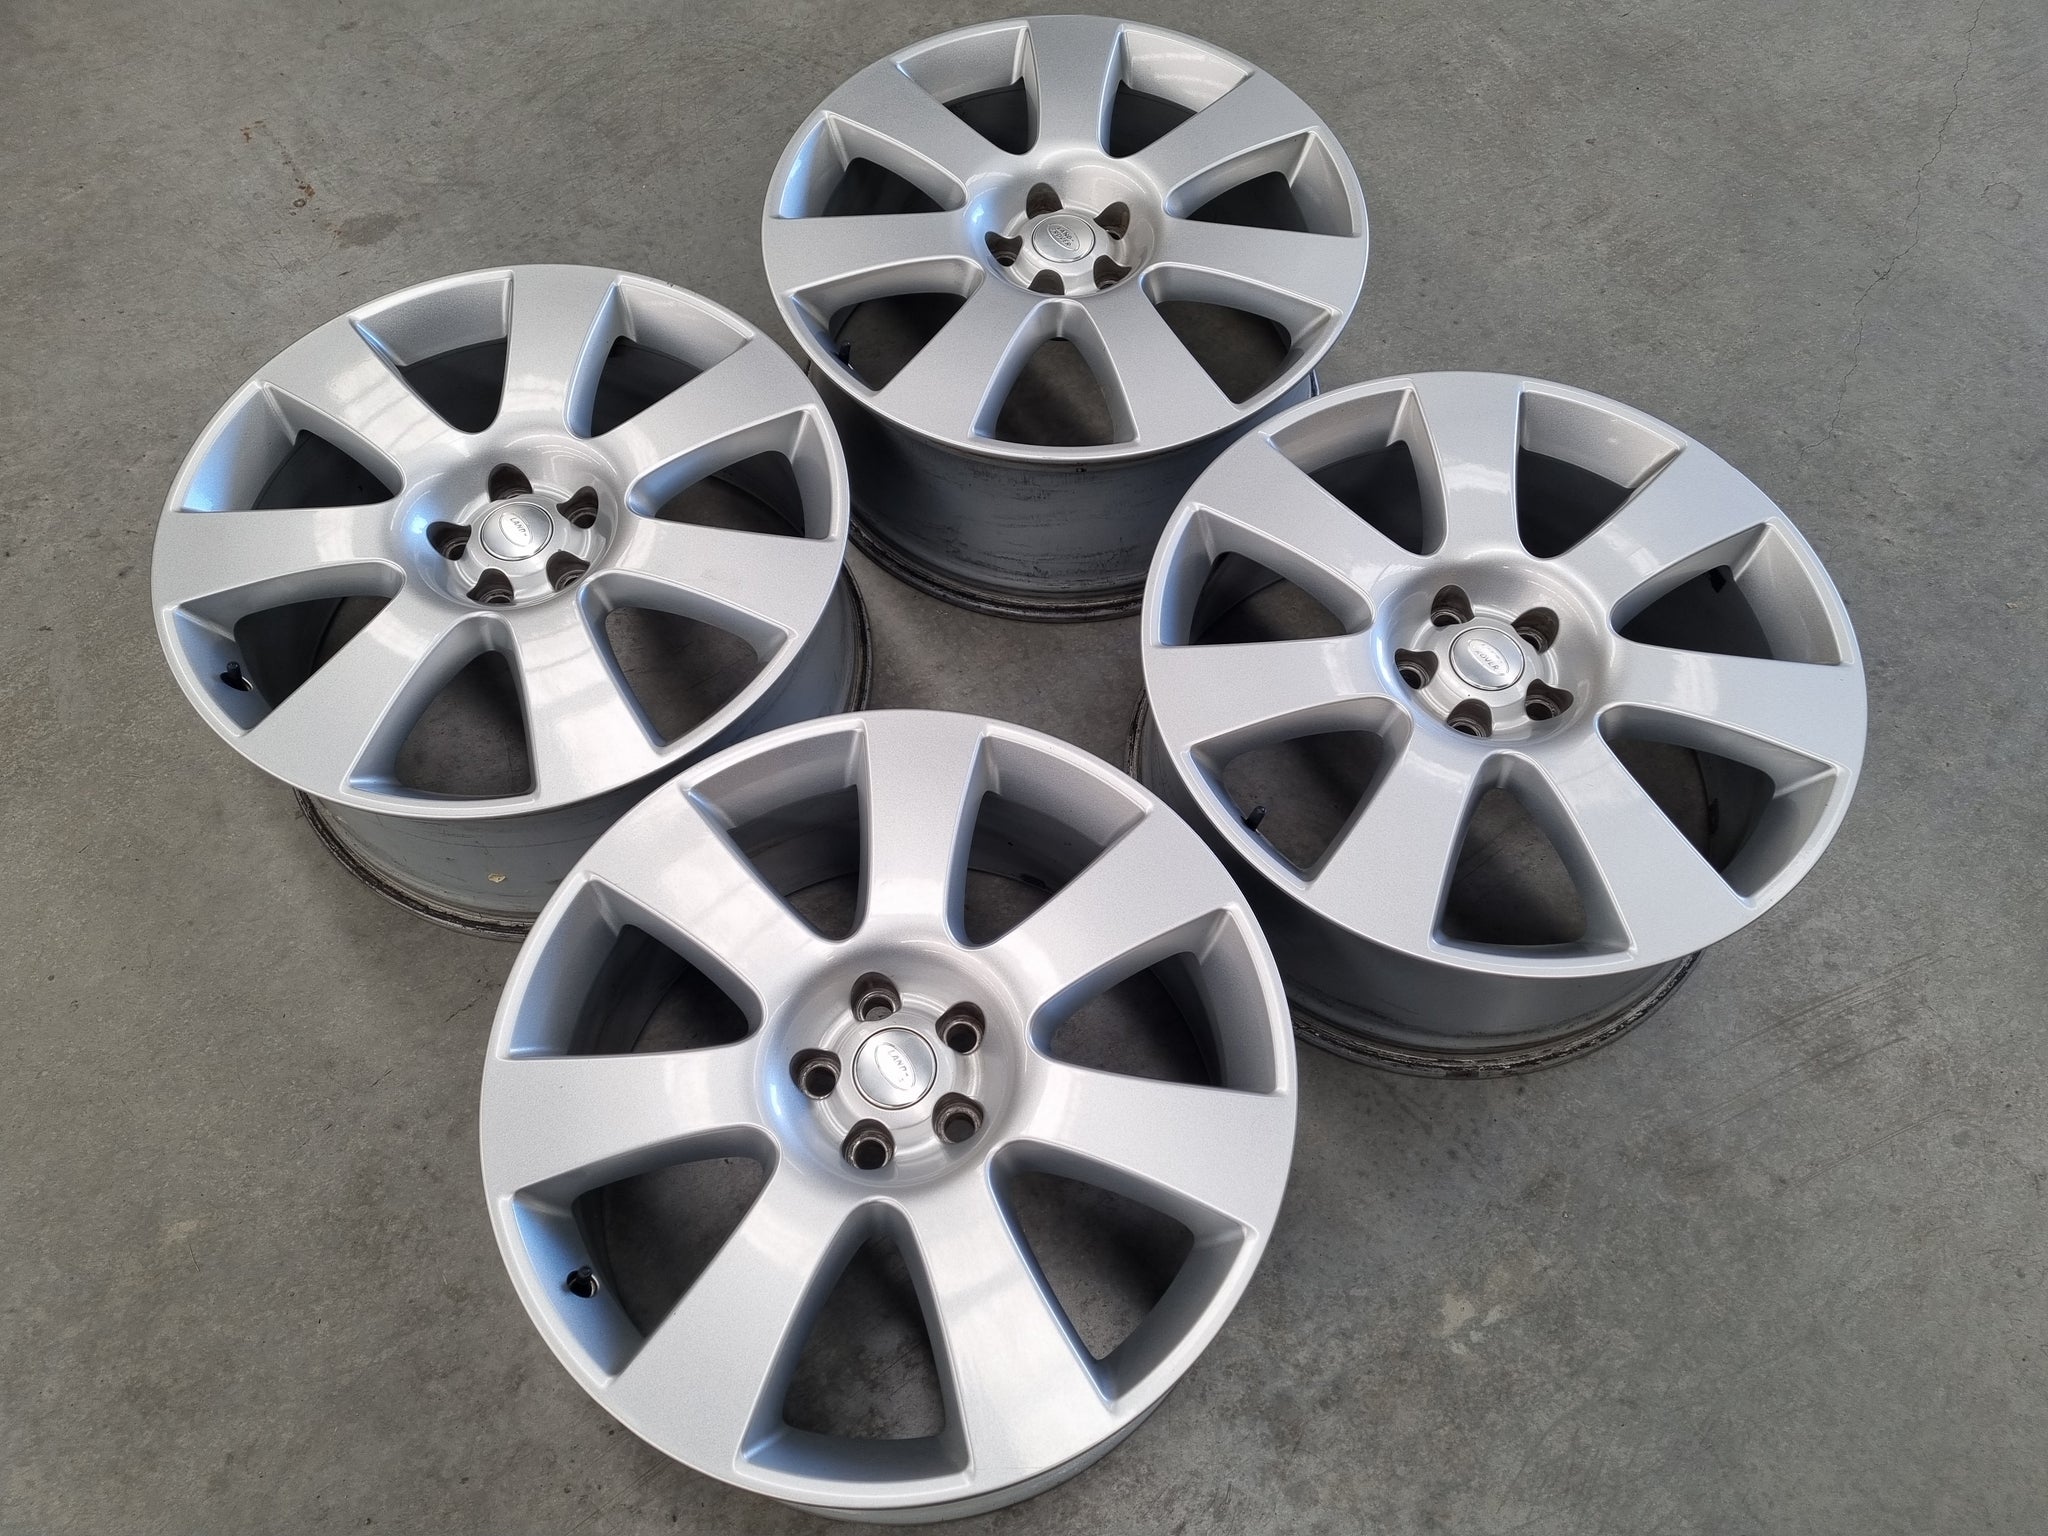 Load image into Gallery viewer, Genuine Range Rover Vogue Silver 22 Inch Alloy Wheels Set of 4
